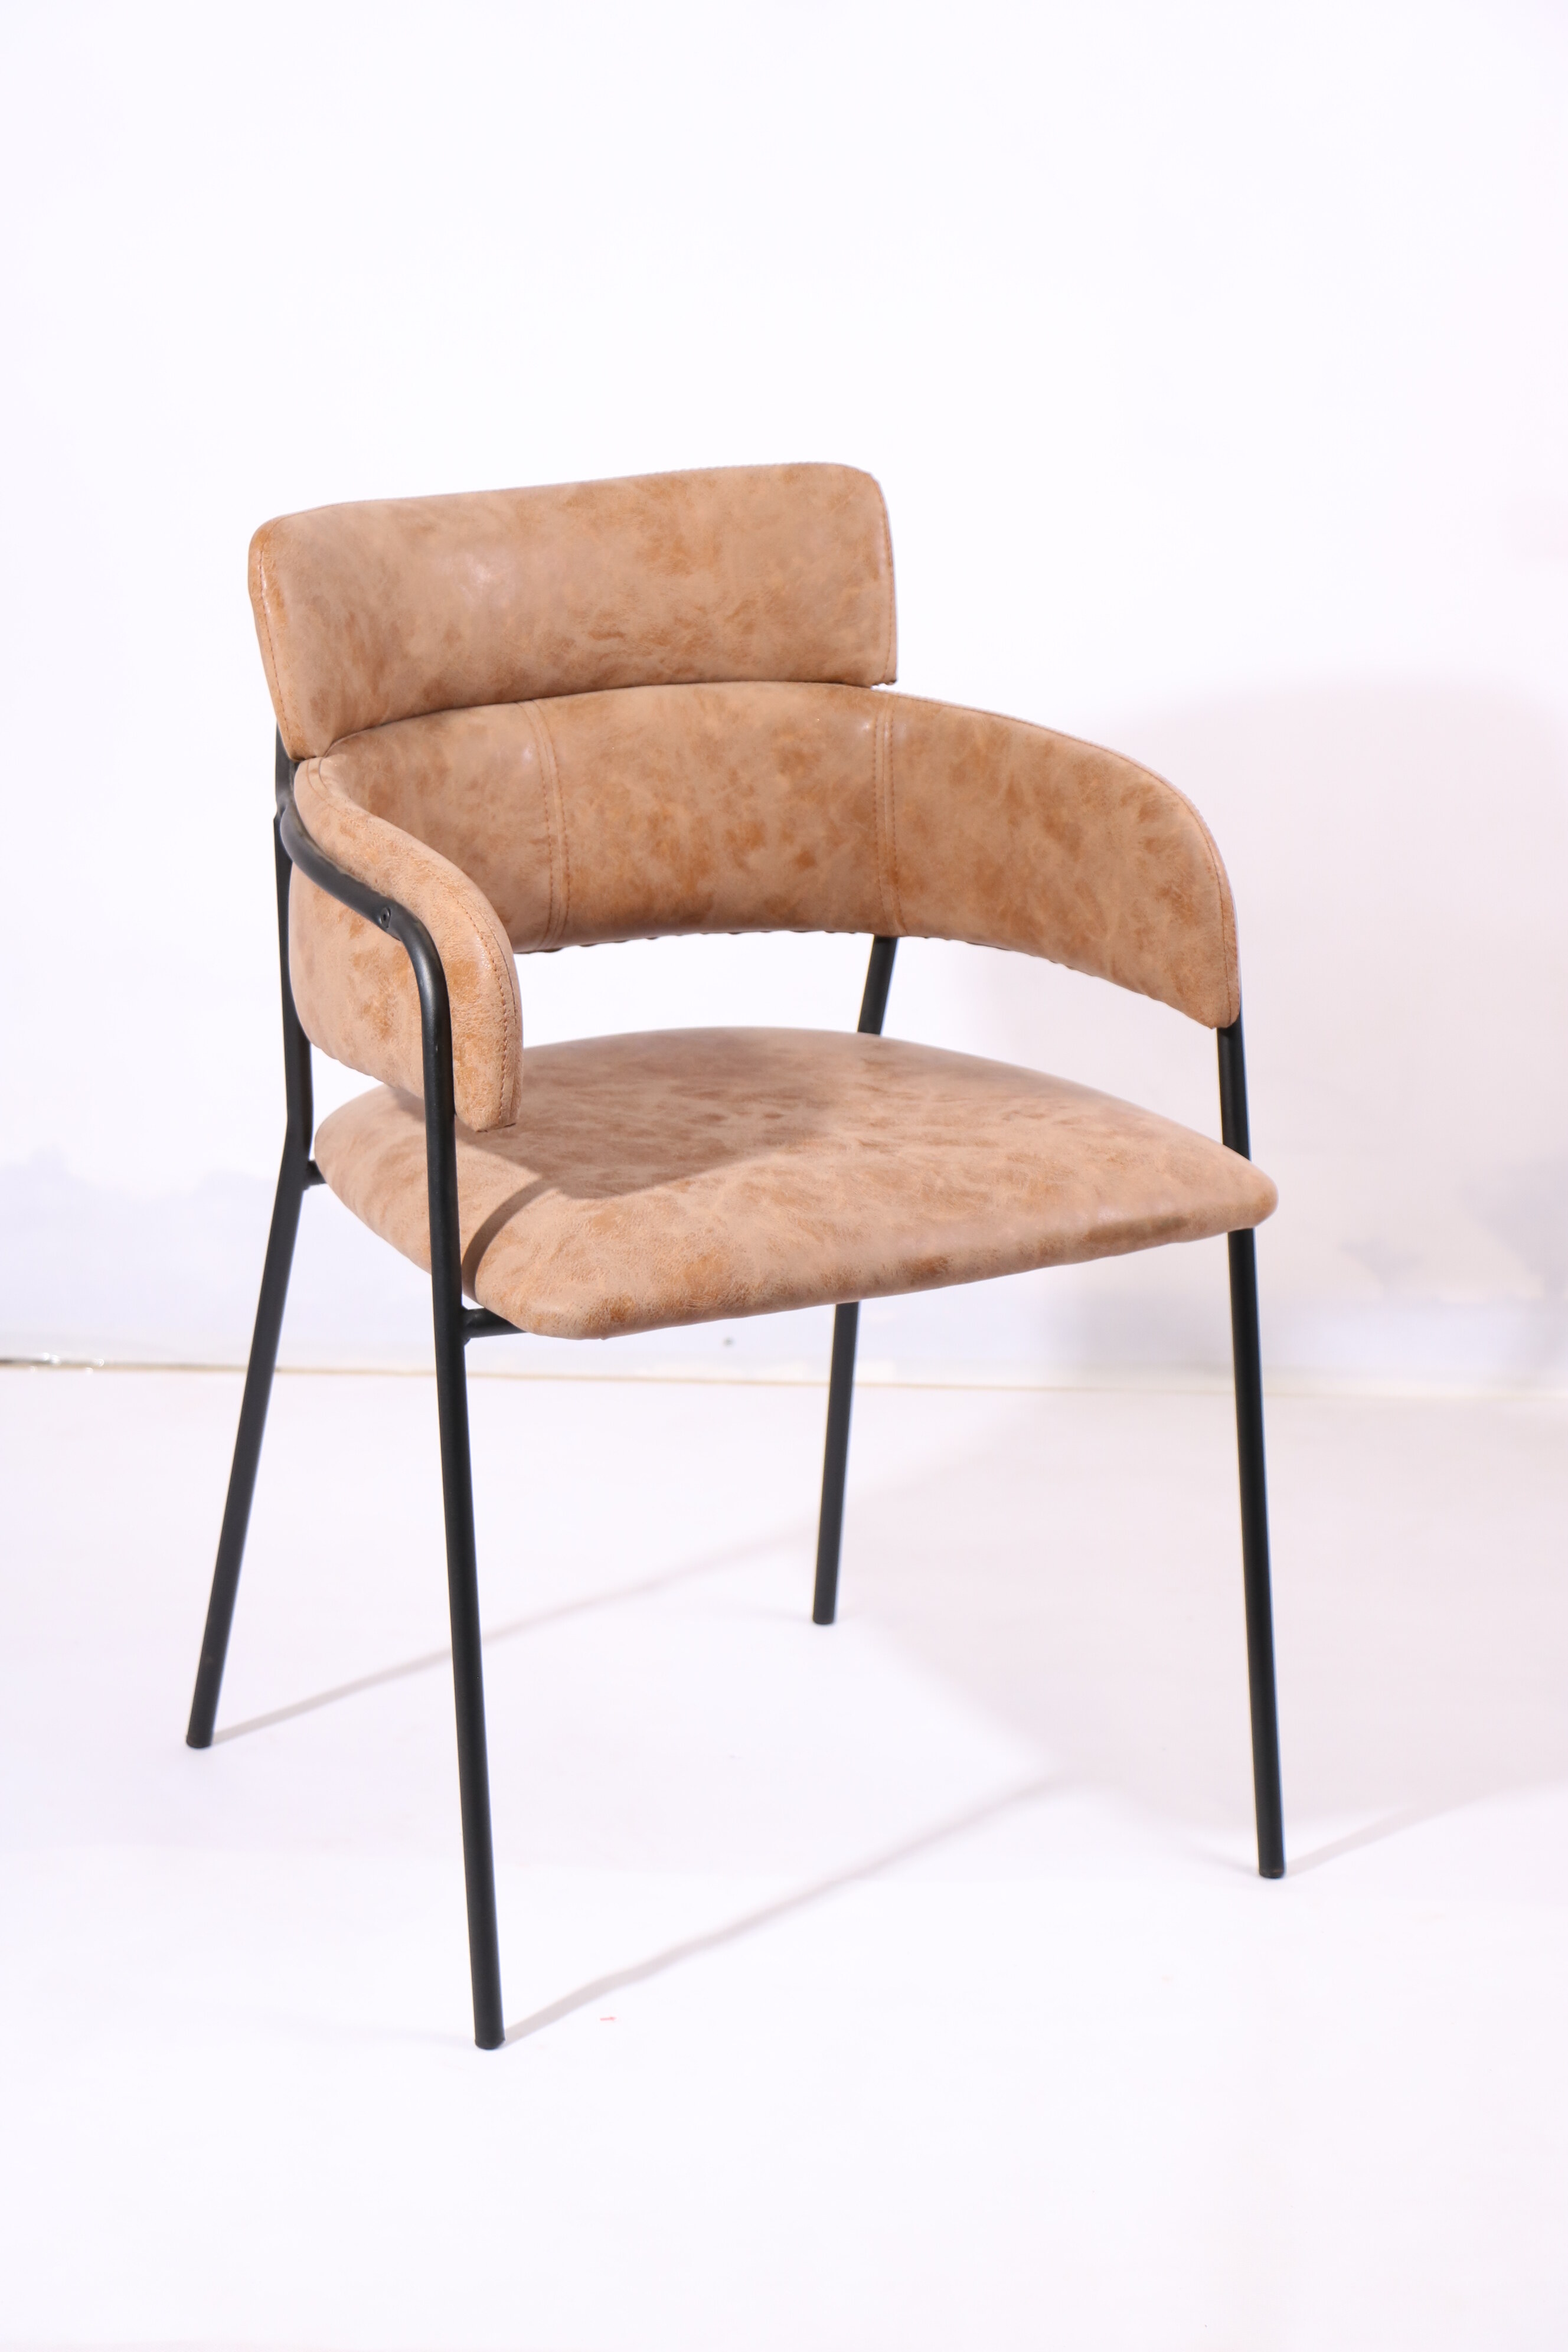 Classic fashion dining chair in three colors